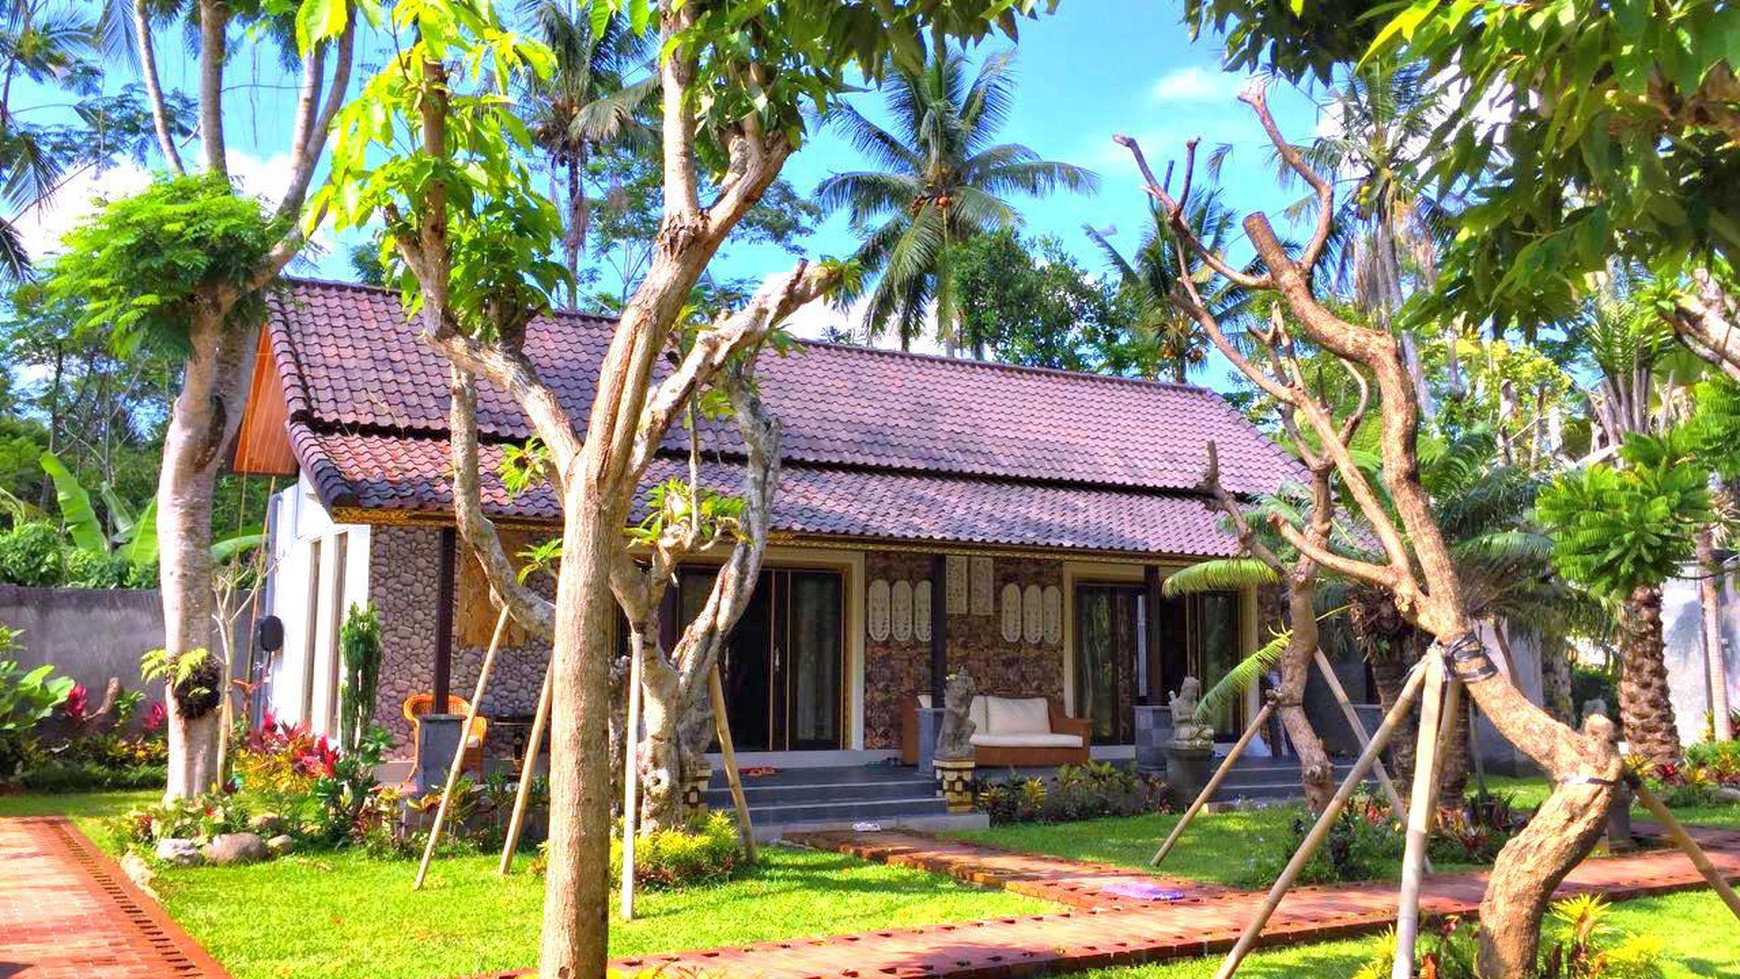 Exclusive Offer: Former Hotel on 8.134 Sqm of Freehold Land with Breathtaking Jungle Views and Renovation Potential 